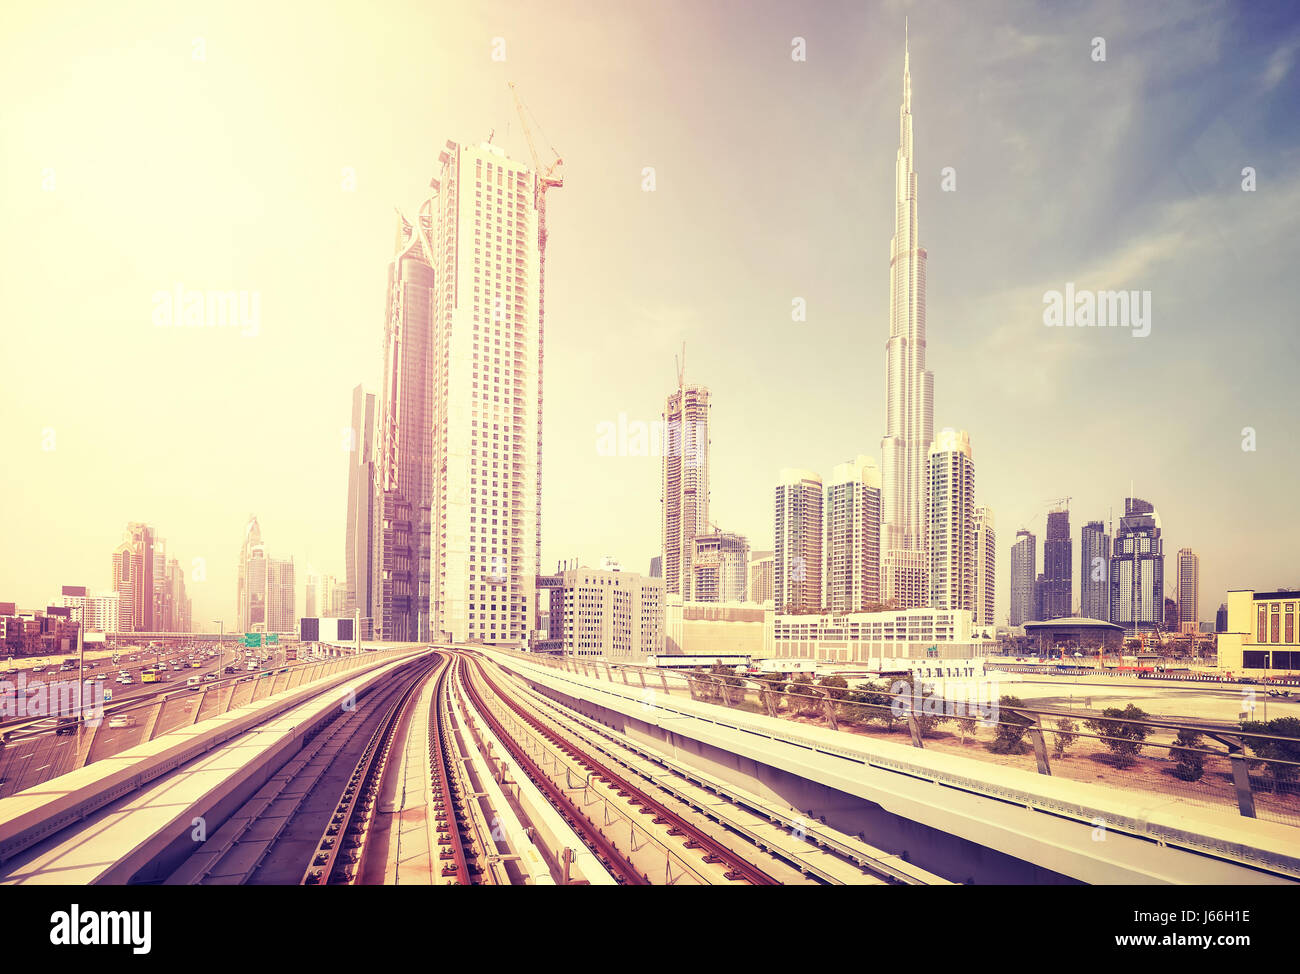 Dubai modern downtown seen from metro train, color toning applied, United Arab Emirates. Stock Photo